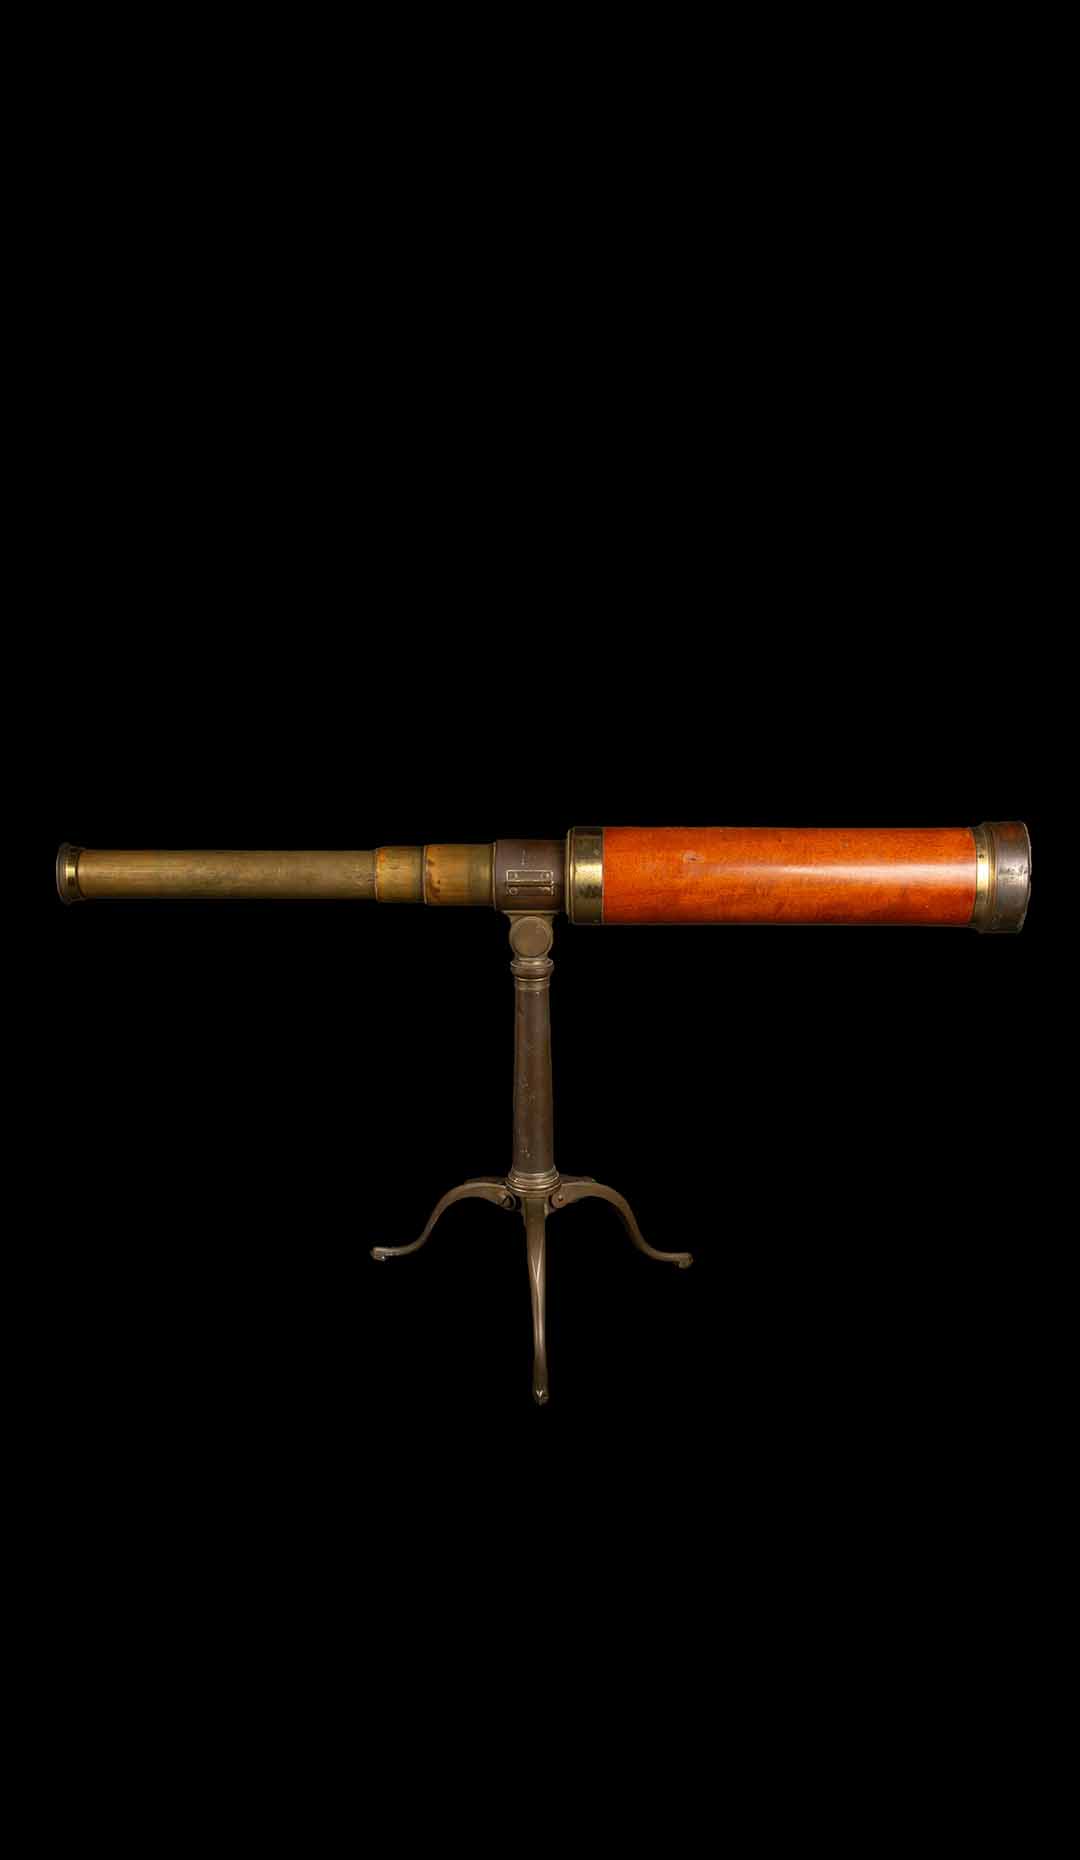 19th Century English Telescope with Wooden Barrel